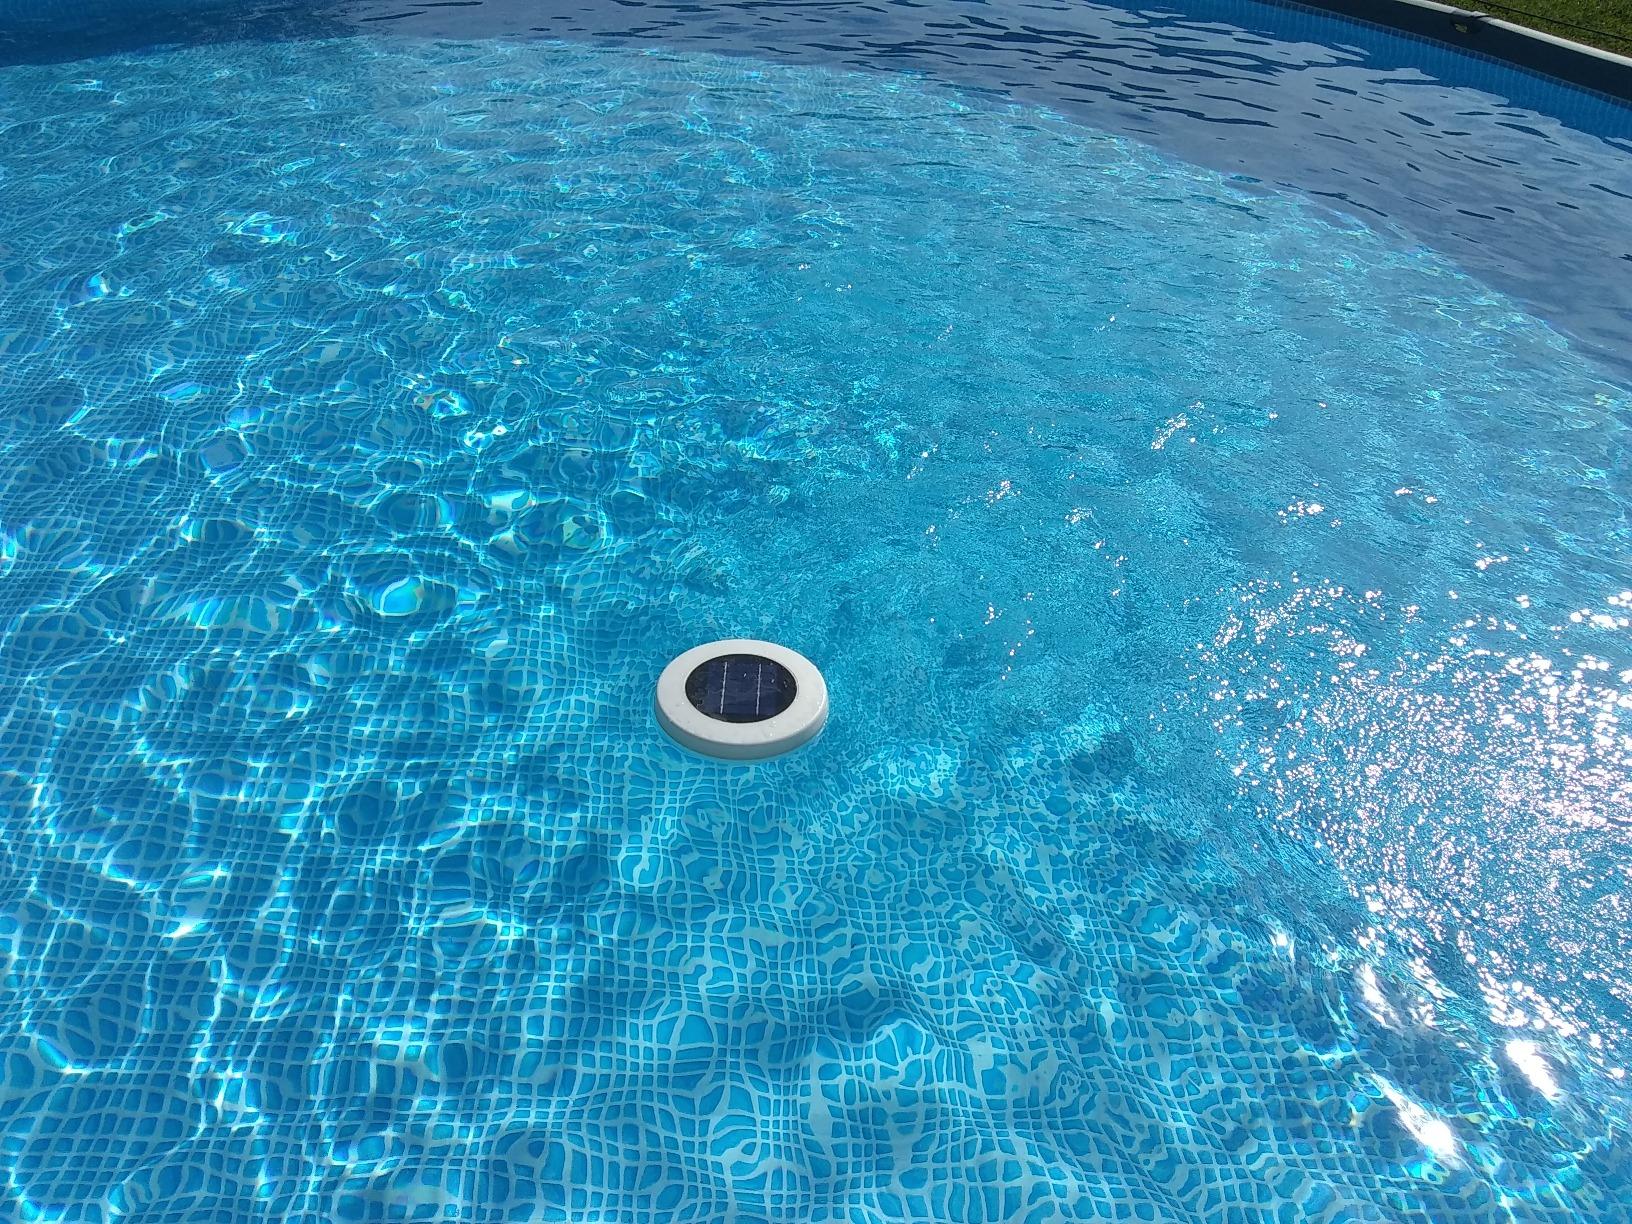 Portable Solar Pool Ionizer for Copper & Silver Ionization - Removes Impurities photo review